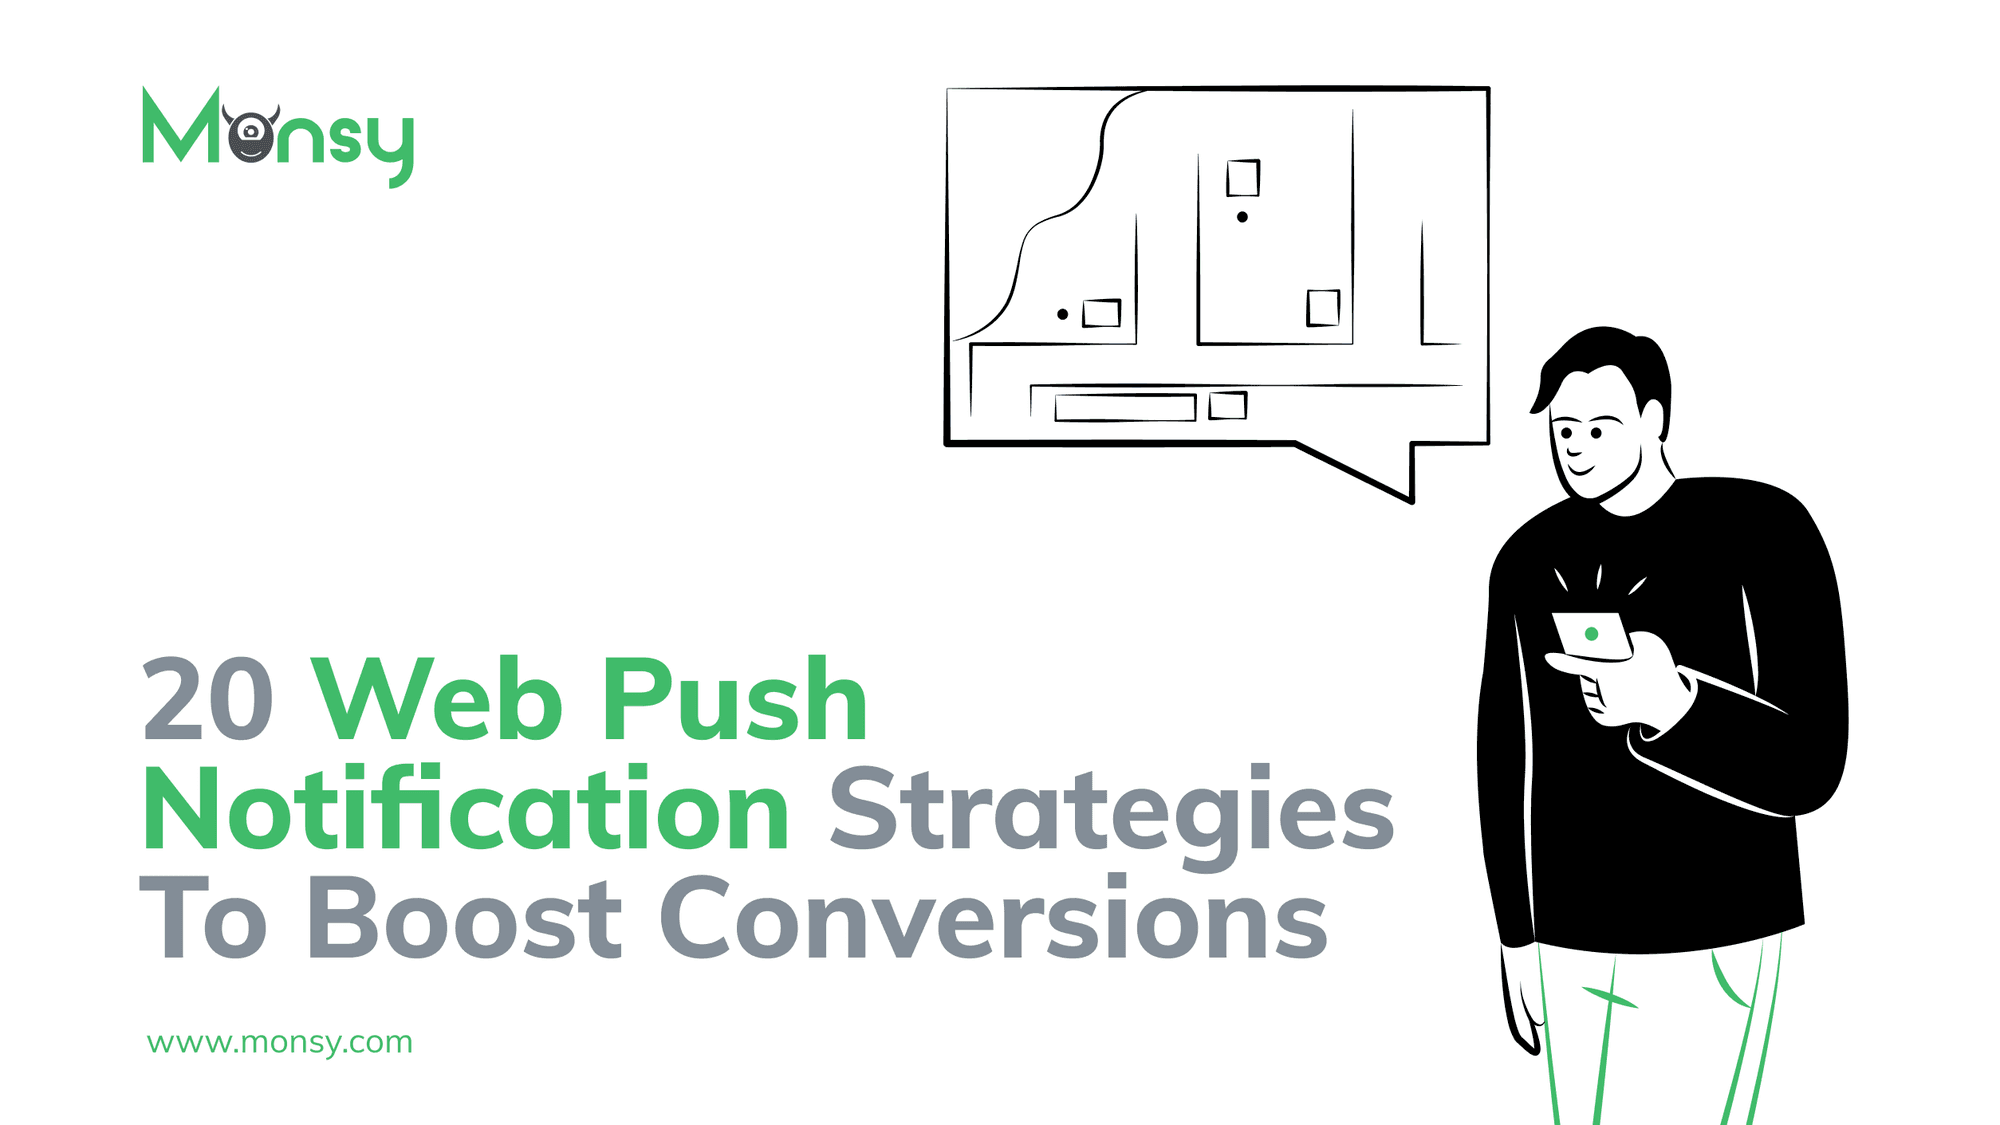 20 Web Push Notification Strategies To Boost Conversions - Monsy